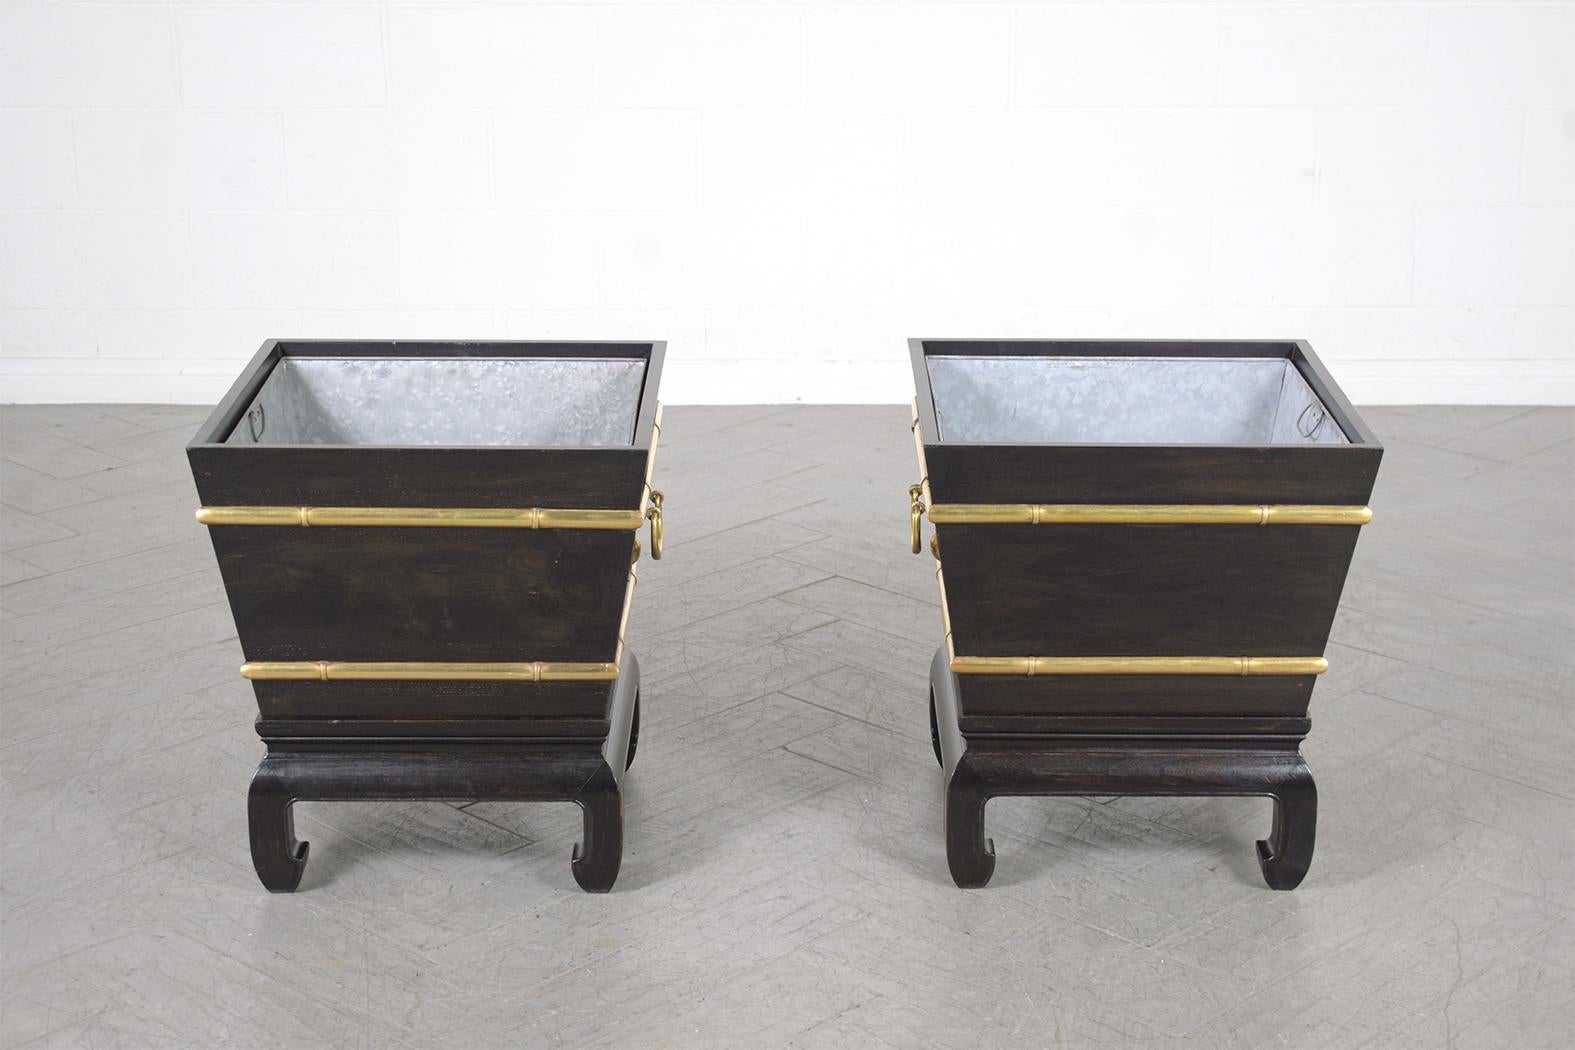 Mid-20th Century Restored Early 1900s Chinese Wood and Brass Garden Planters For Sale